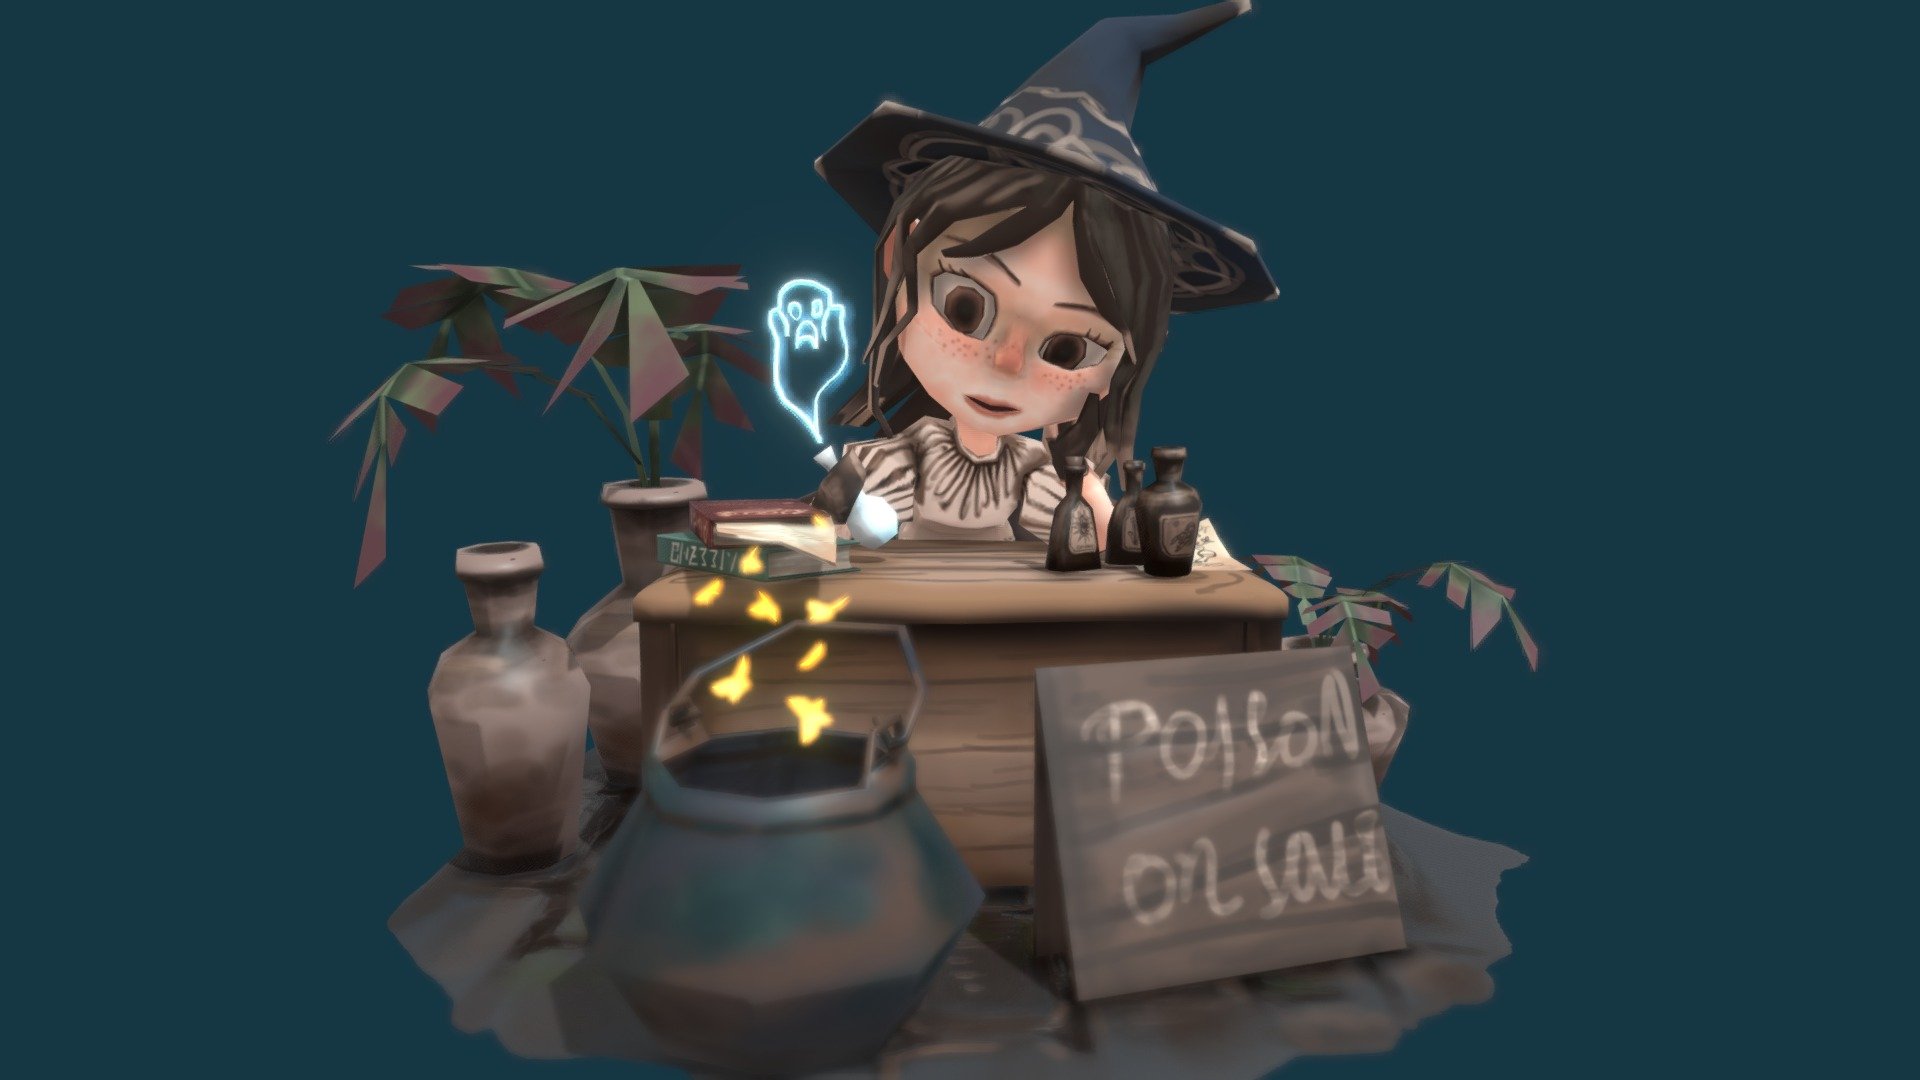 It sells magic potions! Here you can also find the most famous poison called ‘love’.(ALL IN BLENDER) ————————————————————————
这是我原创的第一个人物带小场景的模型，有很多不足之处，以后我会慢慢摸索，逐步形成我独有的成熟的风格。 - little witch's potion store - 3D model by Cherrivalier (@hyalif77) 3d model